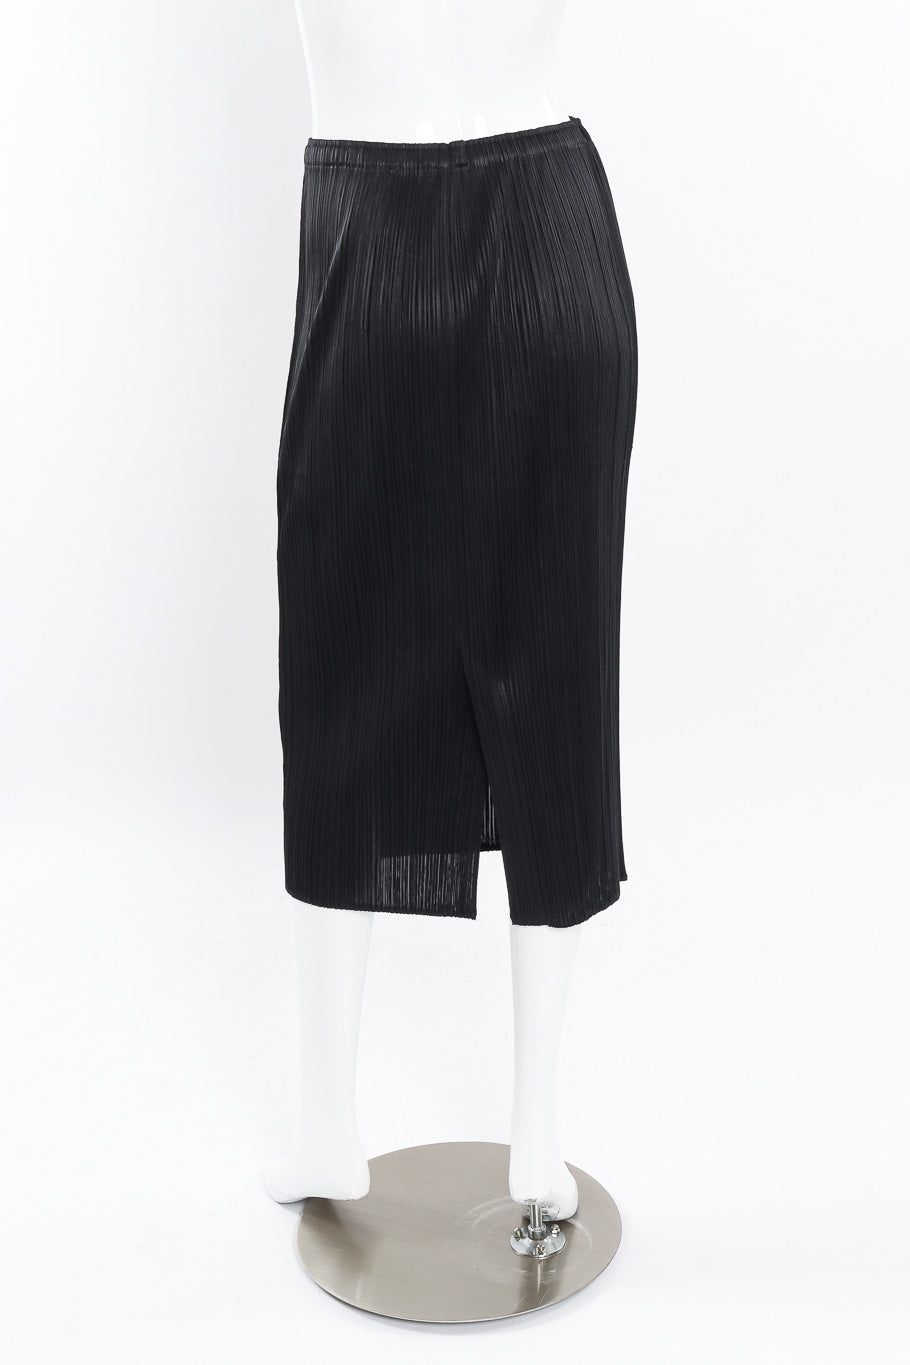 Pleated skirt, top, and jacket set by Issey Miyake on mannequin back skirt only @recessla